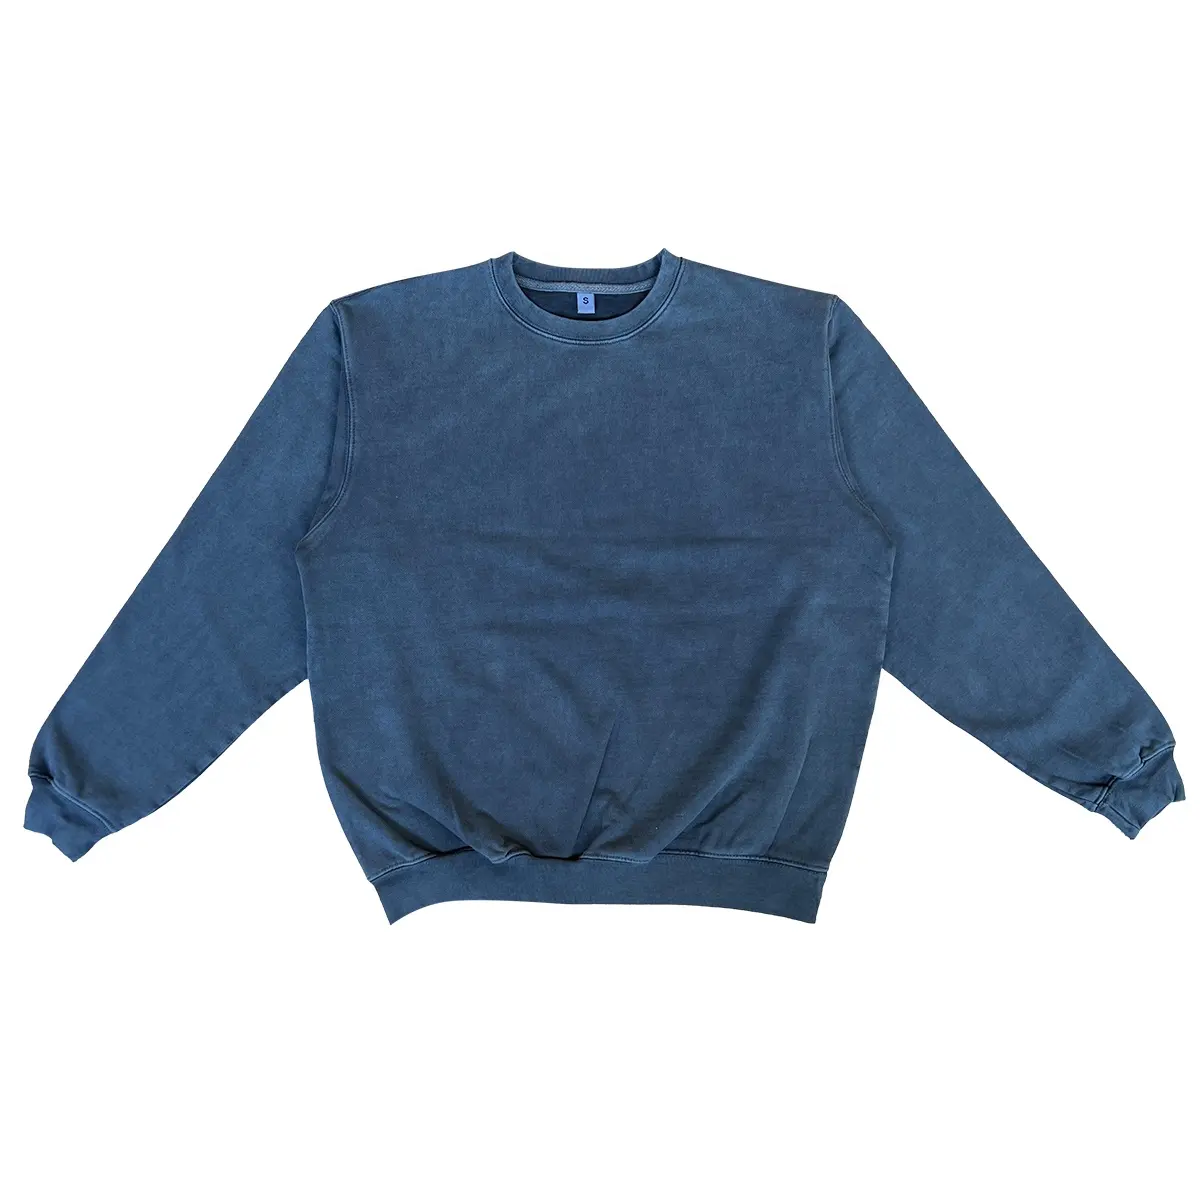 Sweatshirt Relaxed Fit Jumper Oversized Top For Men Basic Blue Color